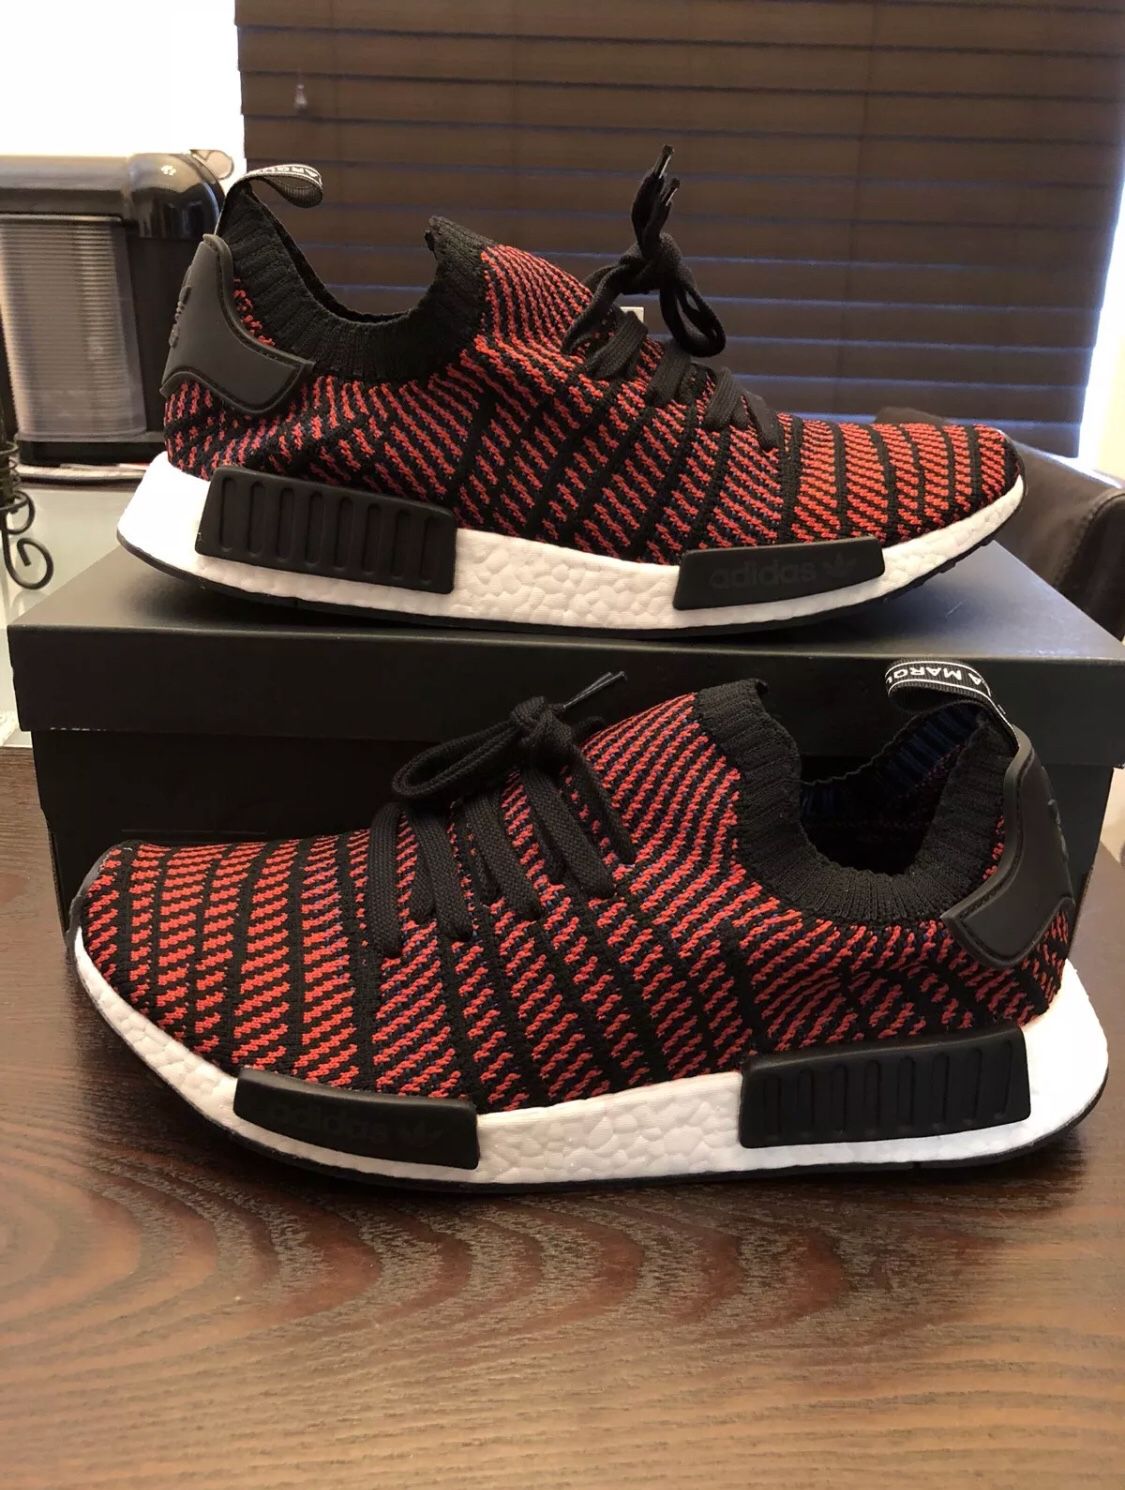 Wonen klem Lengtegraad Men's ADIDAS NMD R1 STLT CQ2385 Core Black / Red Solid / Blue Size 12 Shoes  NEW w/ Box for Sale in Davie, FL - OfferUp